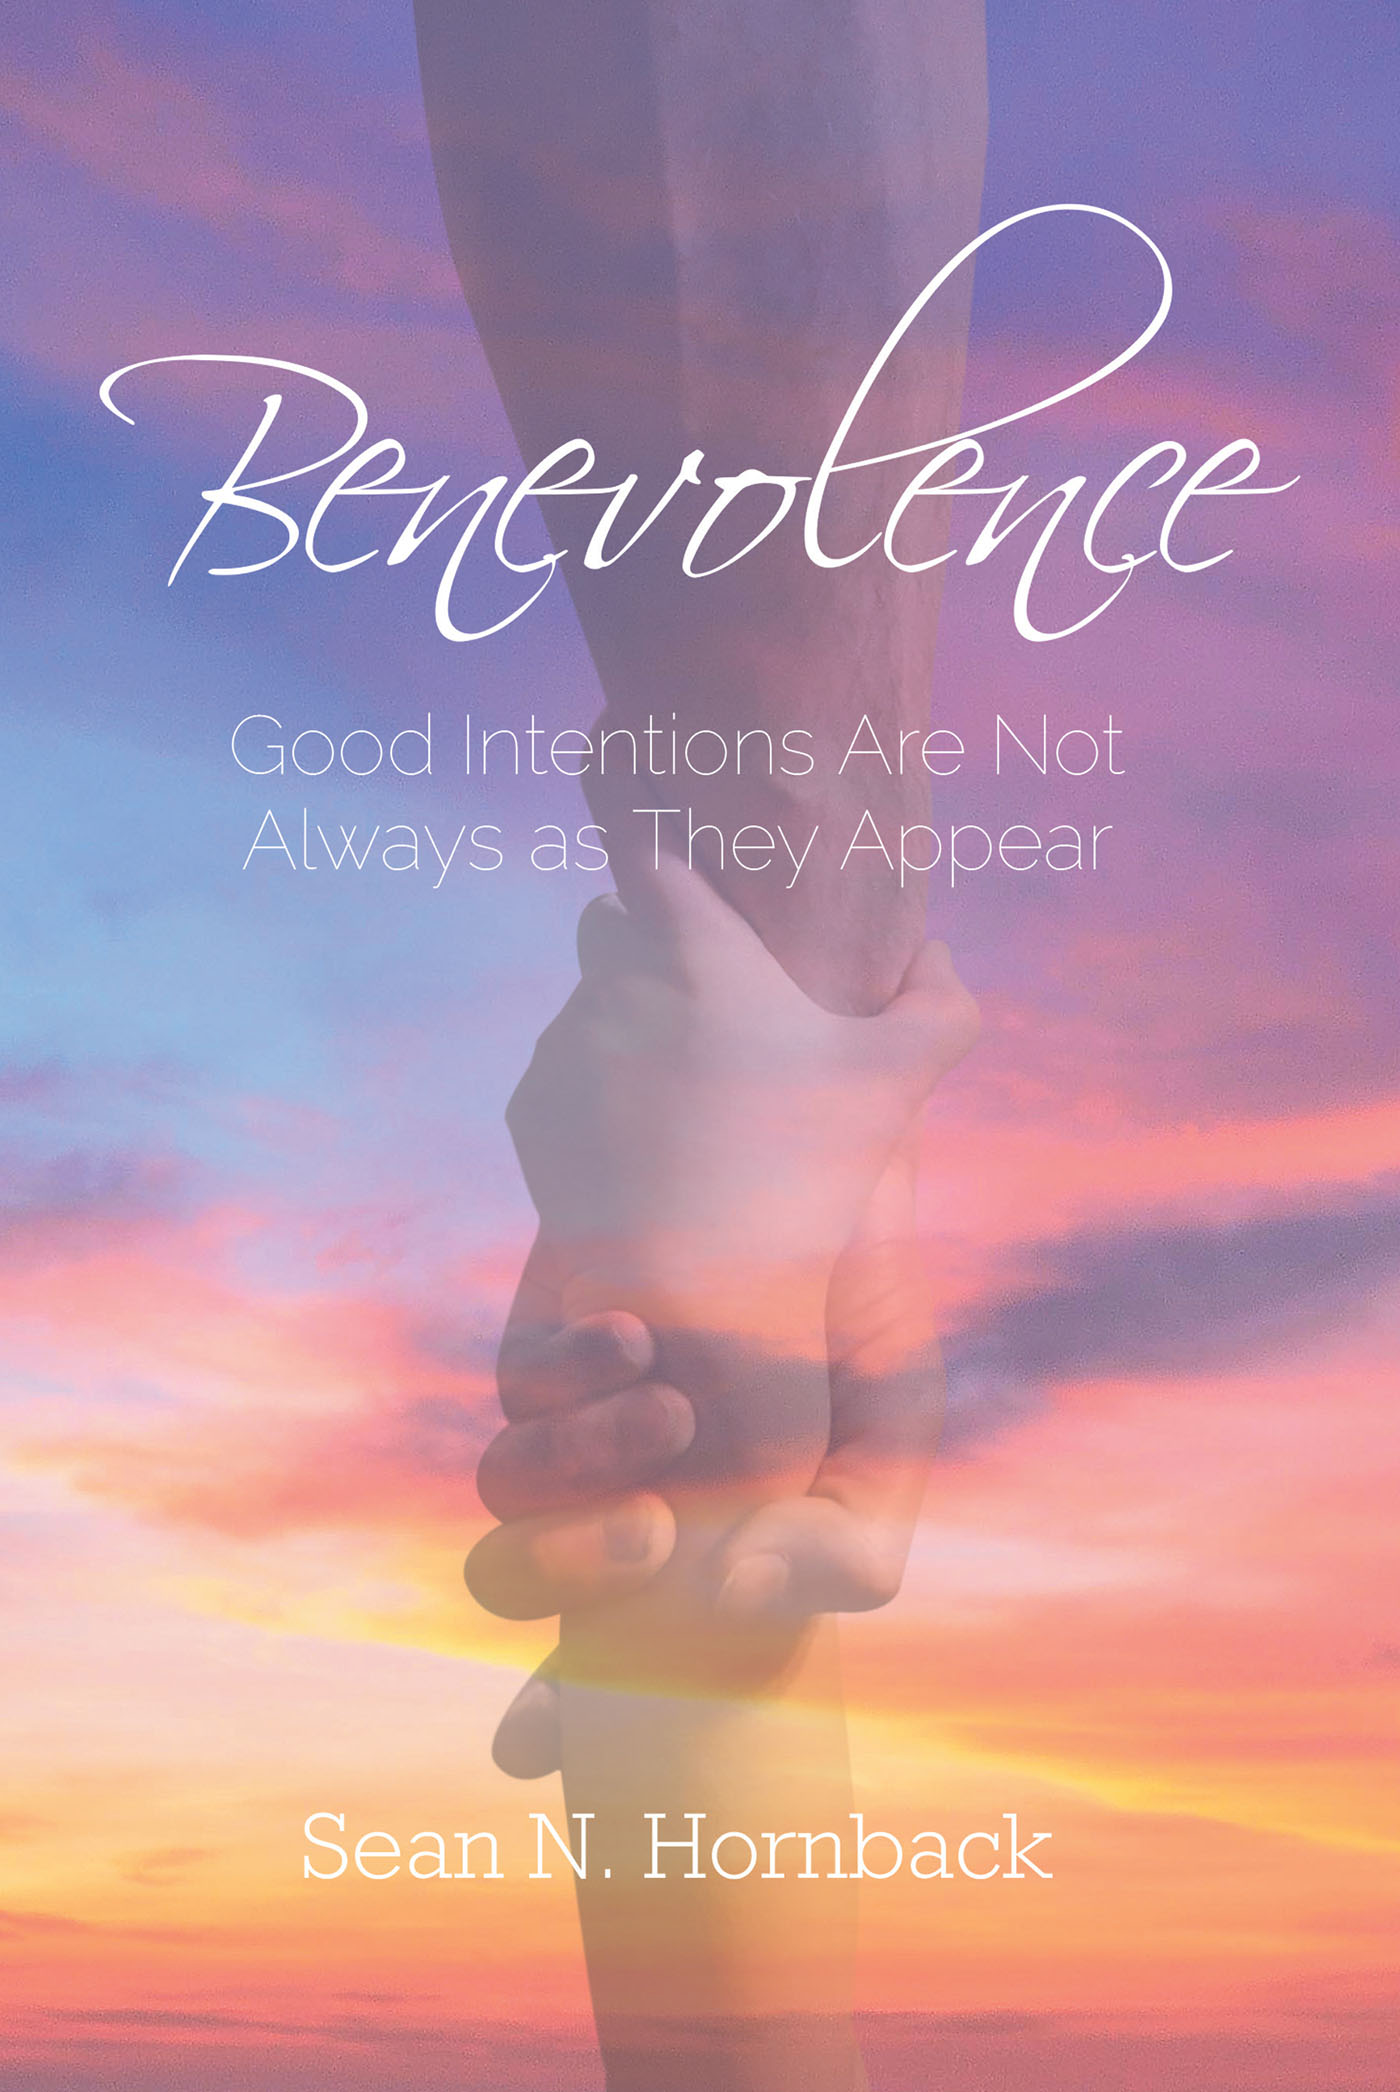 Sean N. Hornback’s New Book "Benevolence: Good Intentions Are Not Always as They Appear" Centers Around a Man Named Klaus, Who Finds Himself on the Run with His Only Son